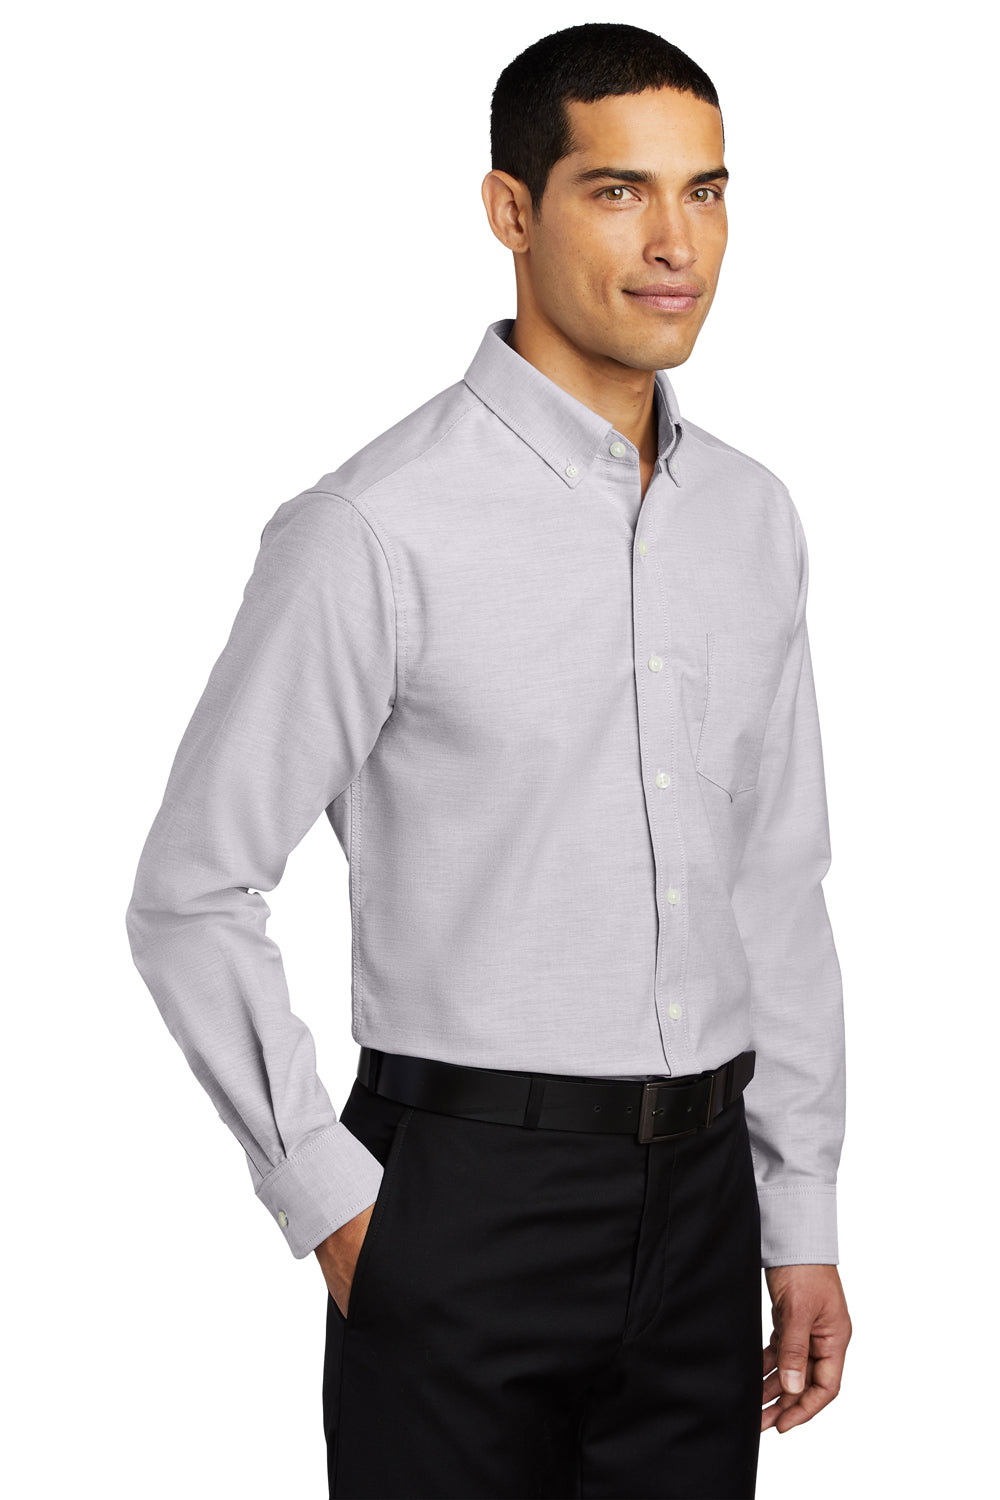 Port Authority S658/TS658 SuperPro Oxford Wrinkle Resistant Long Sleeve Button Down Shirt w/ Pocket Gusty Grey 3Q